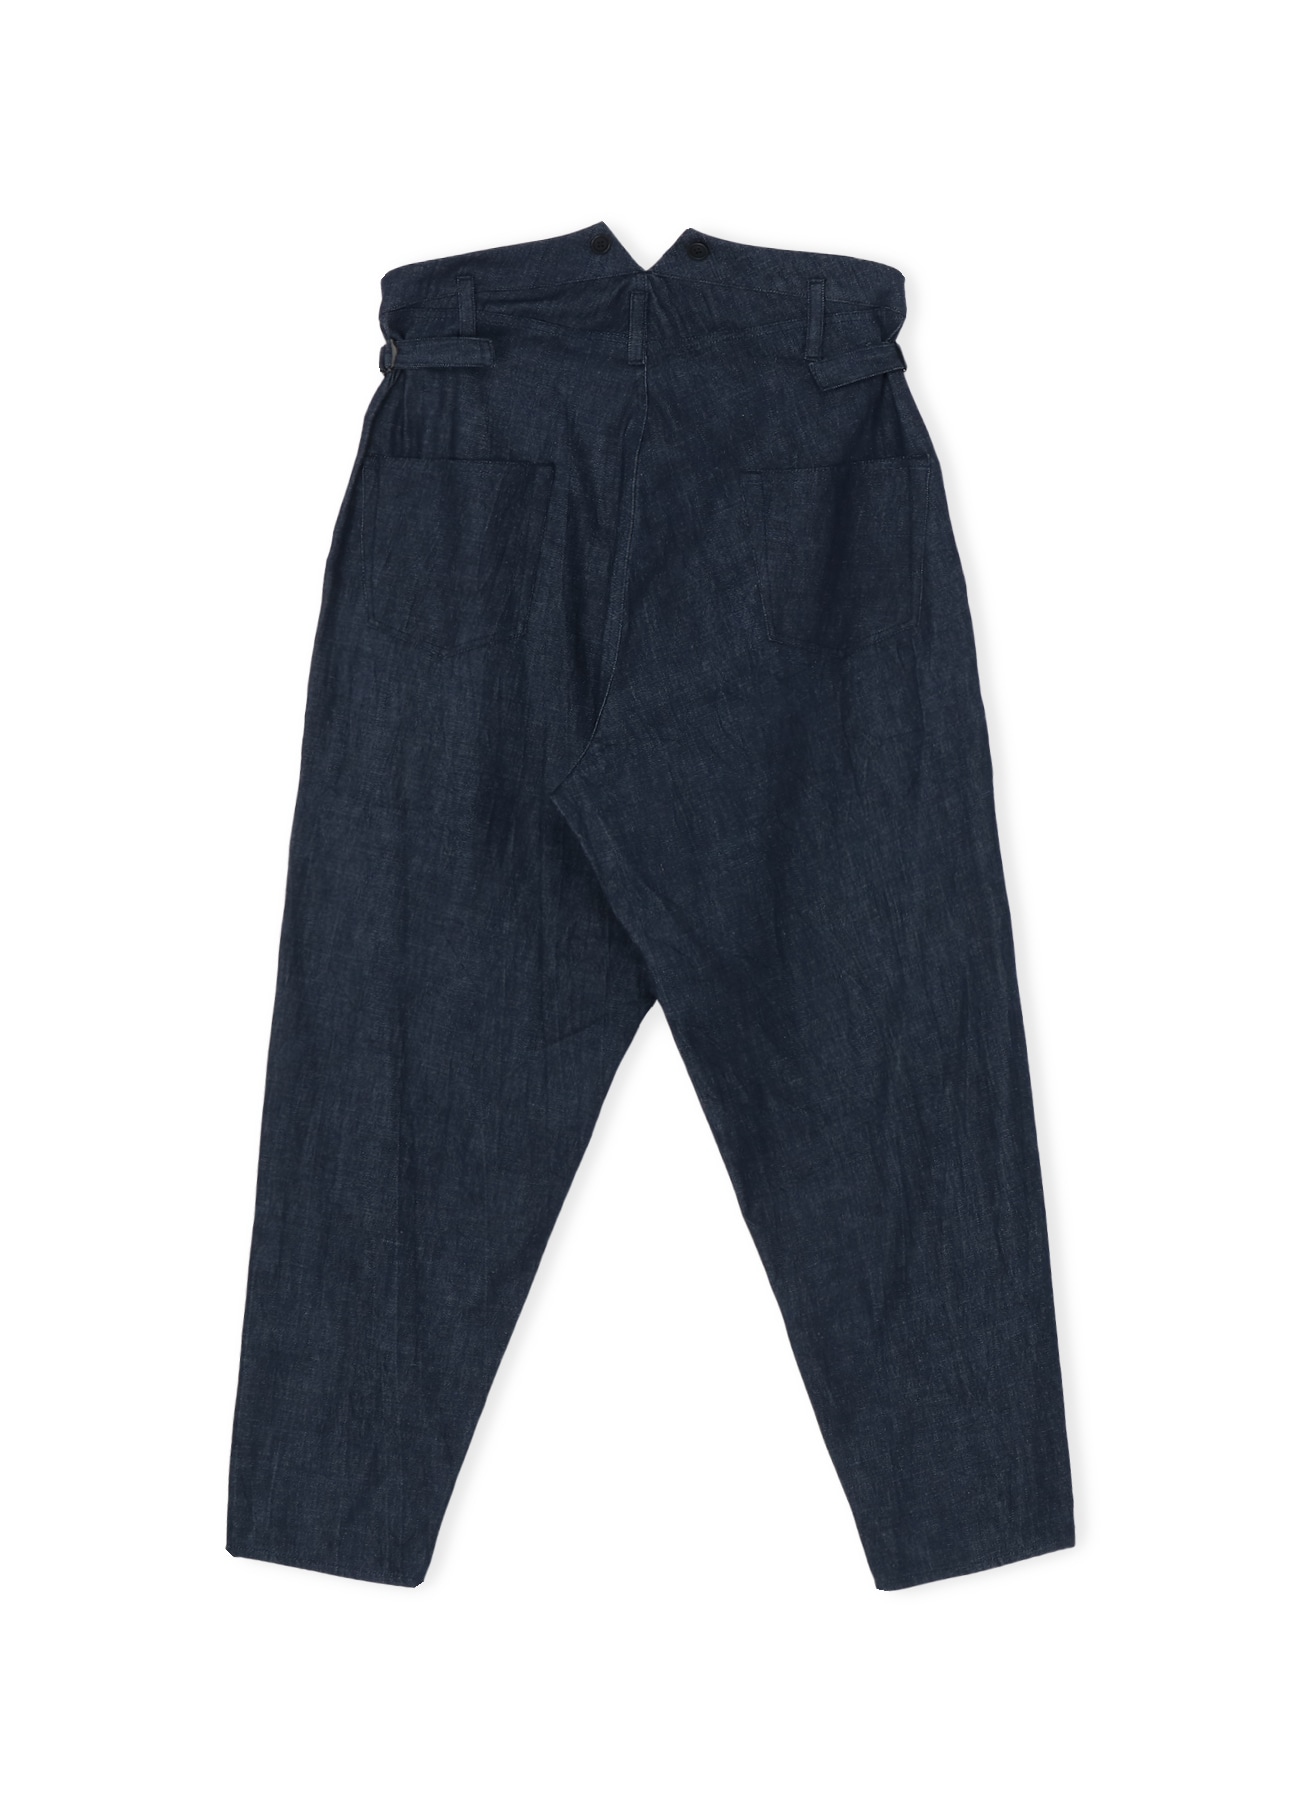 DENIM PANTS WITH SUSPENDER BUTTONS AND ADJUSTABLE SIDE TABS(S INDIGO): Y's  for men｜WILDSIDE YOHJI YAMAMOTO [Official